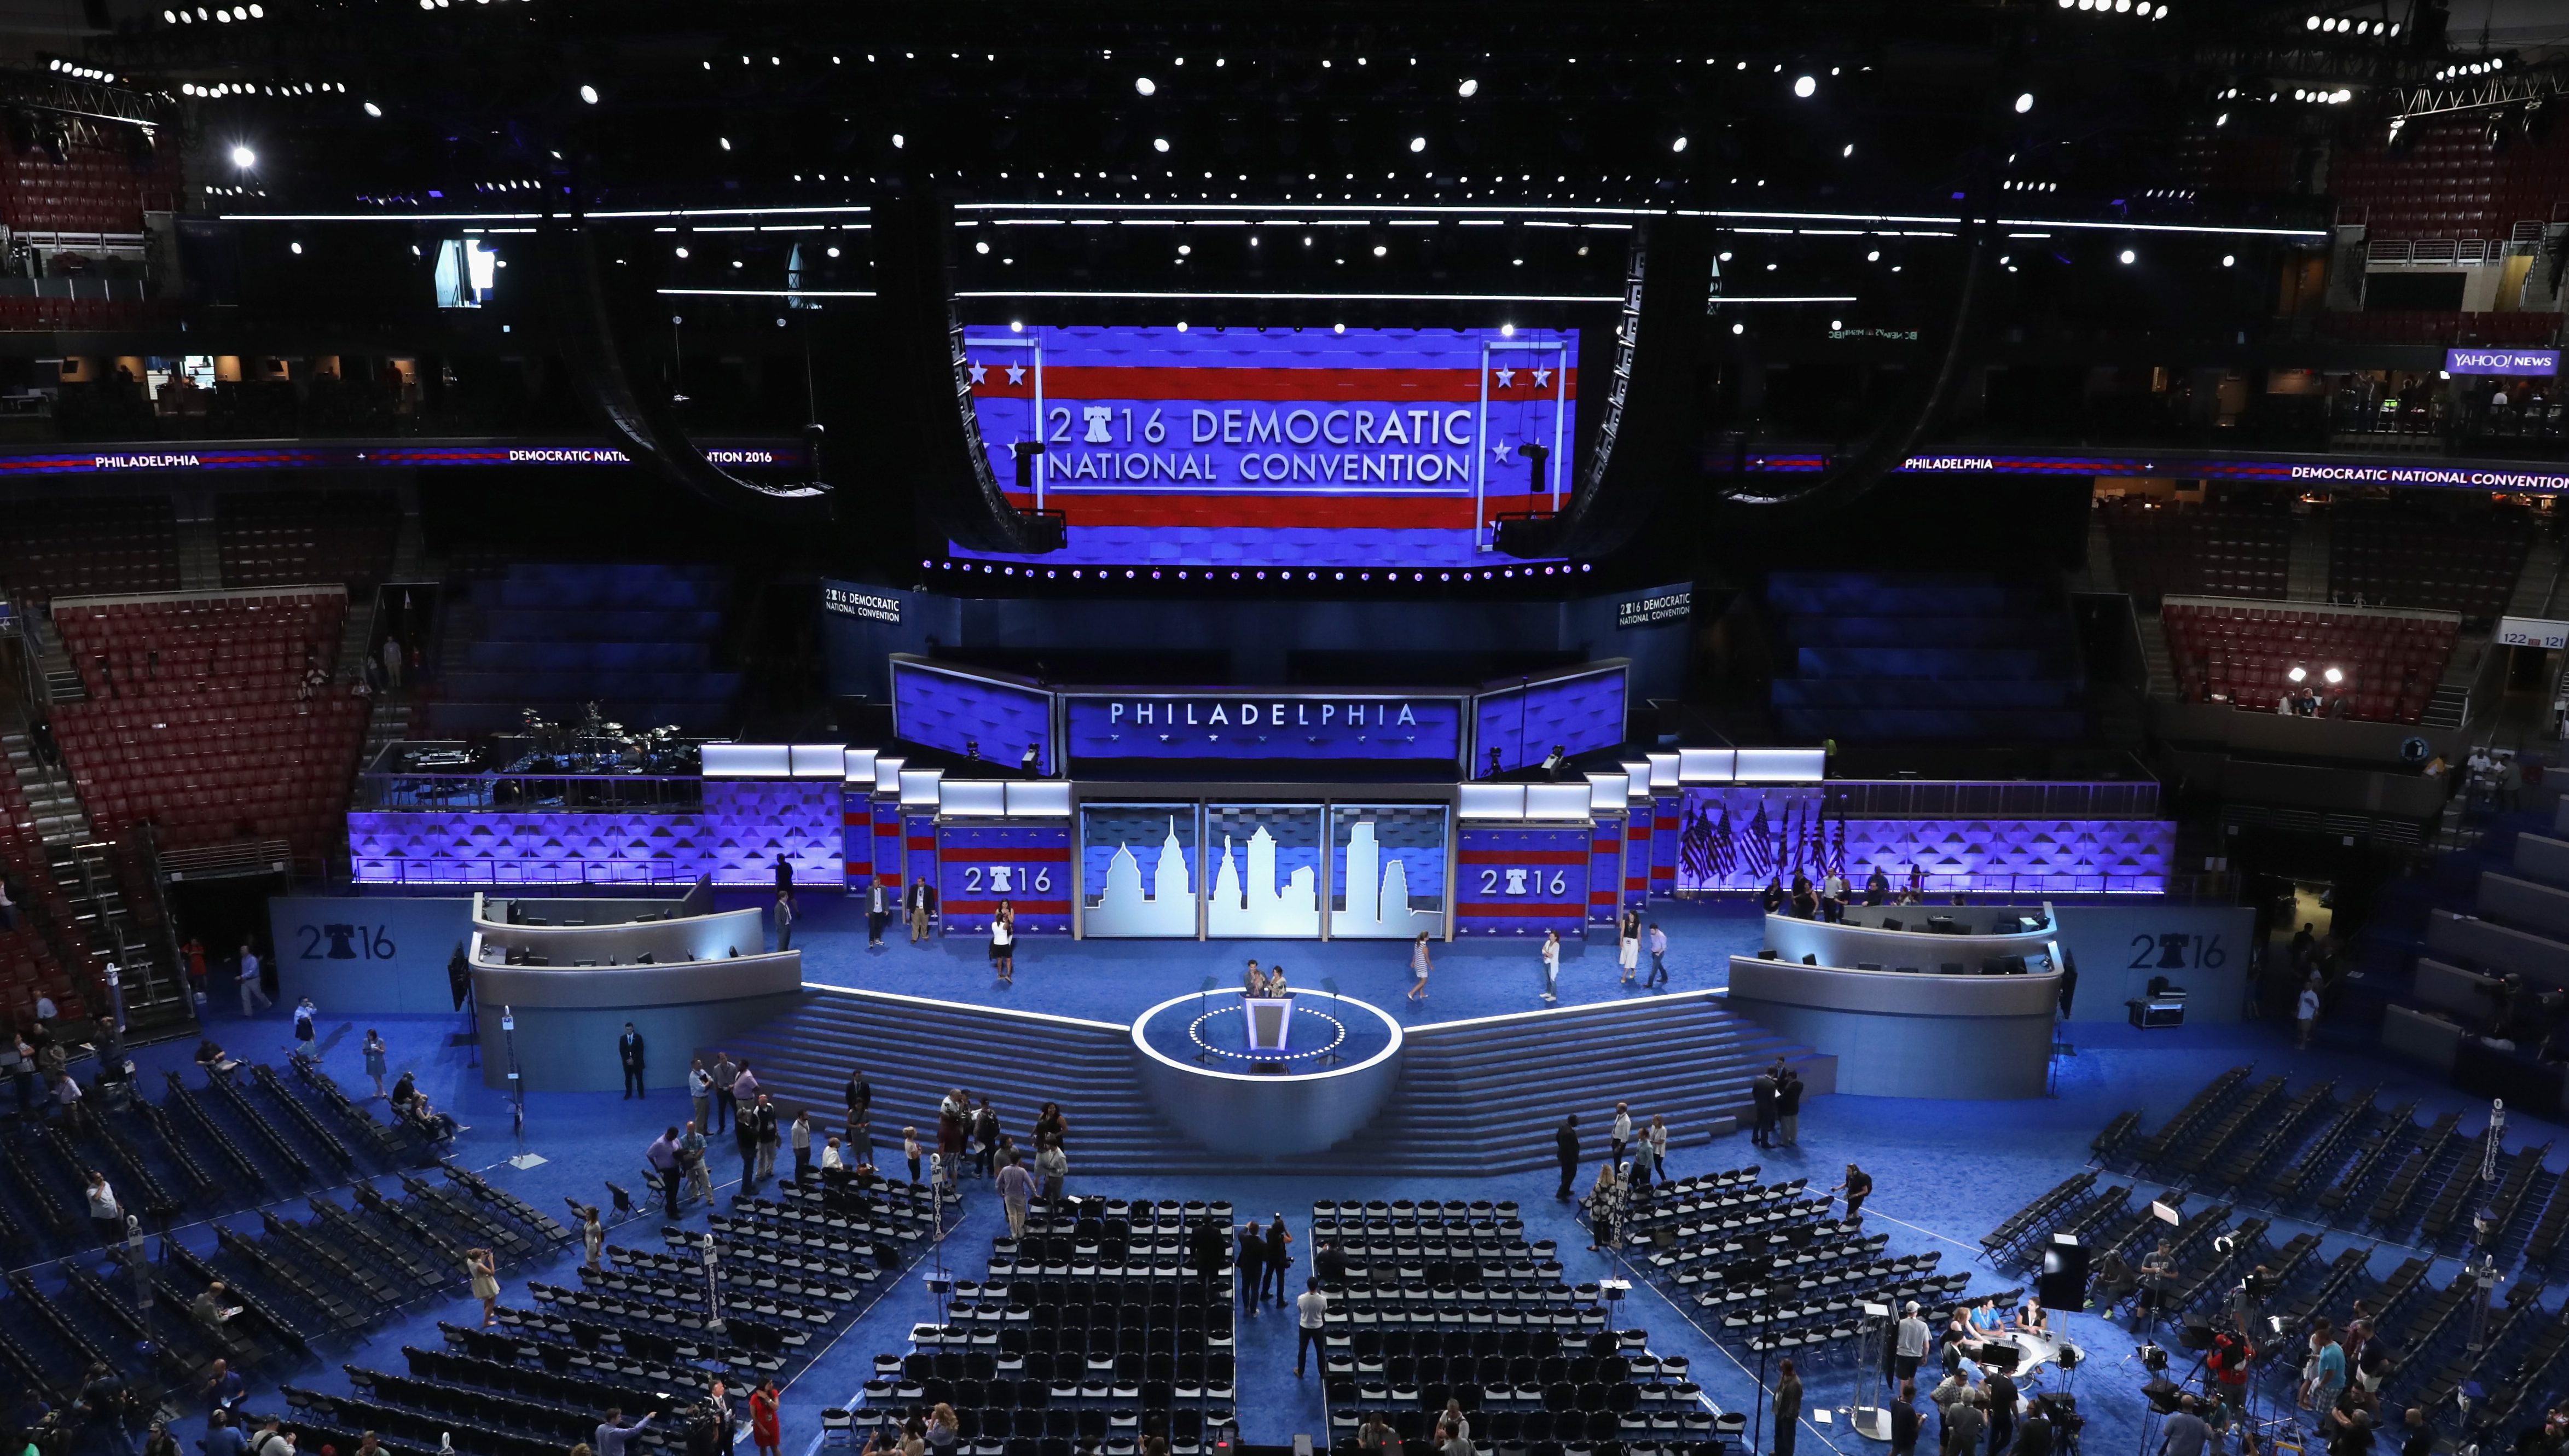 DNC LIVE STREAM Watch Democratic National Convention Online